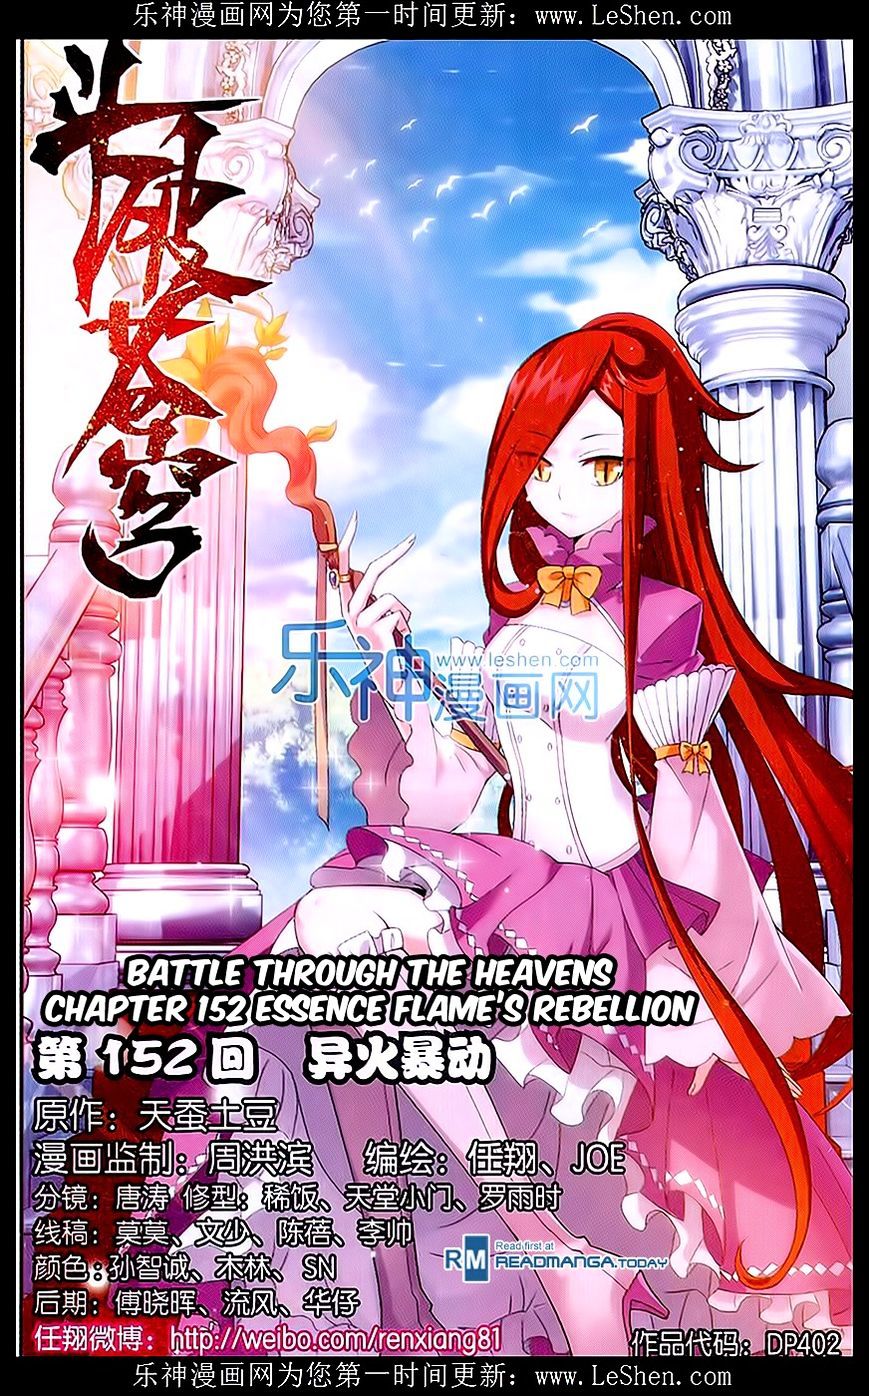 Battle Through The Heavens Chapter 152 : Essence Flame's Rebellion - Picture 1